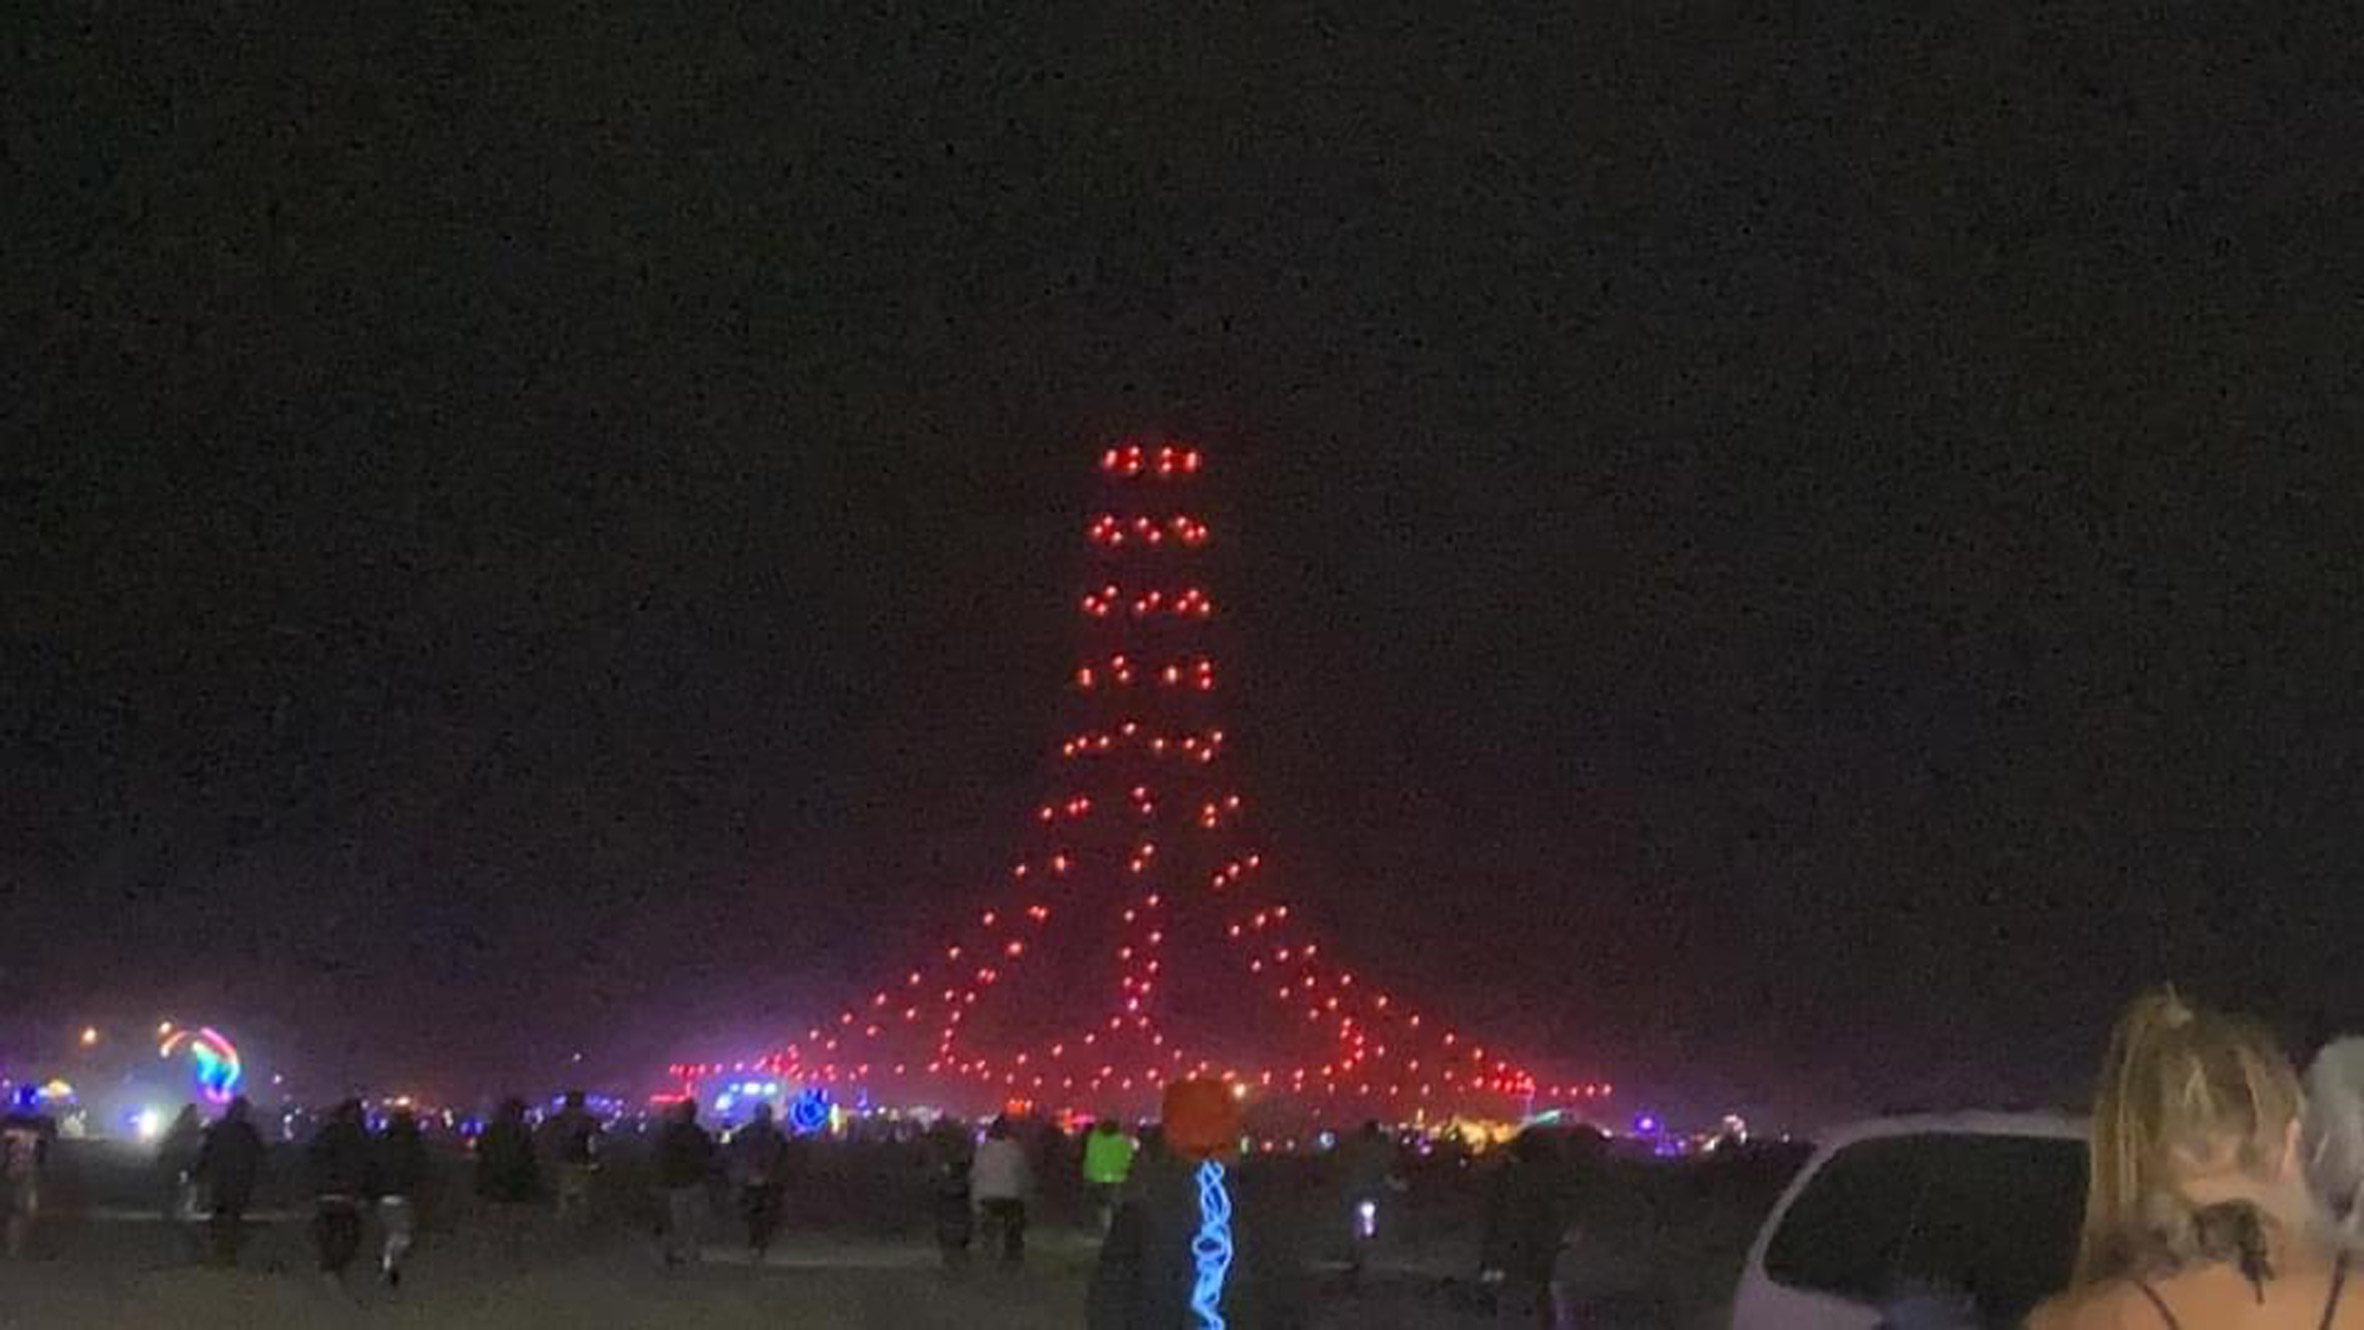 A bell-shaped drone formation at Burning Man